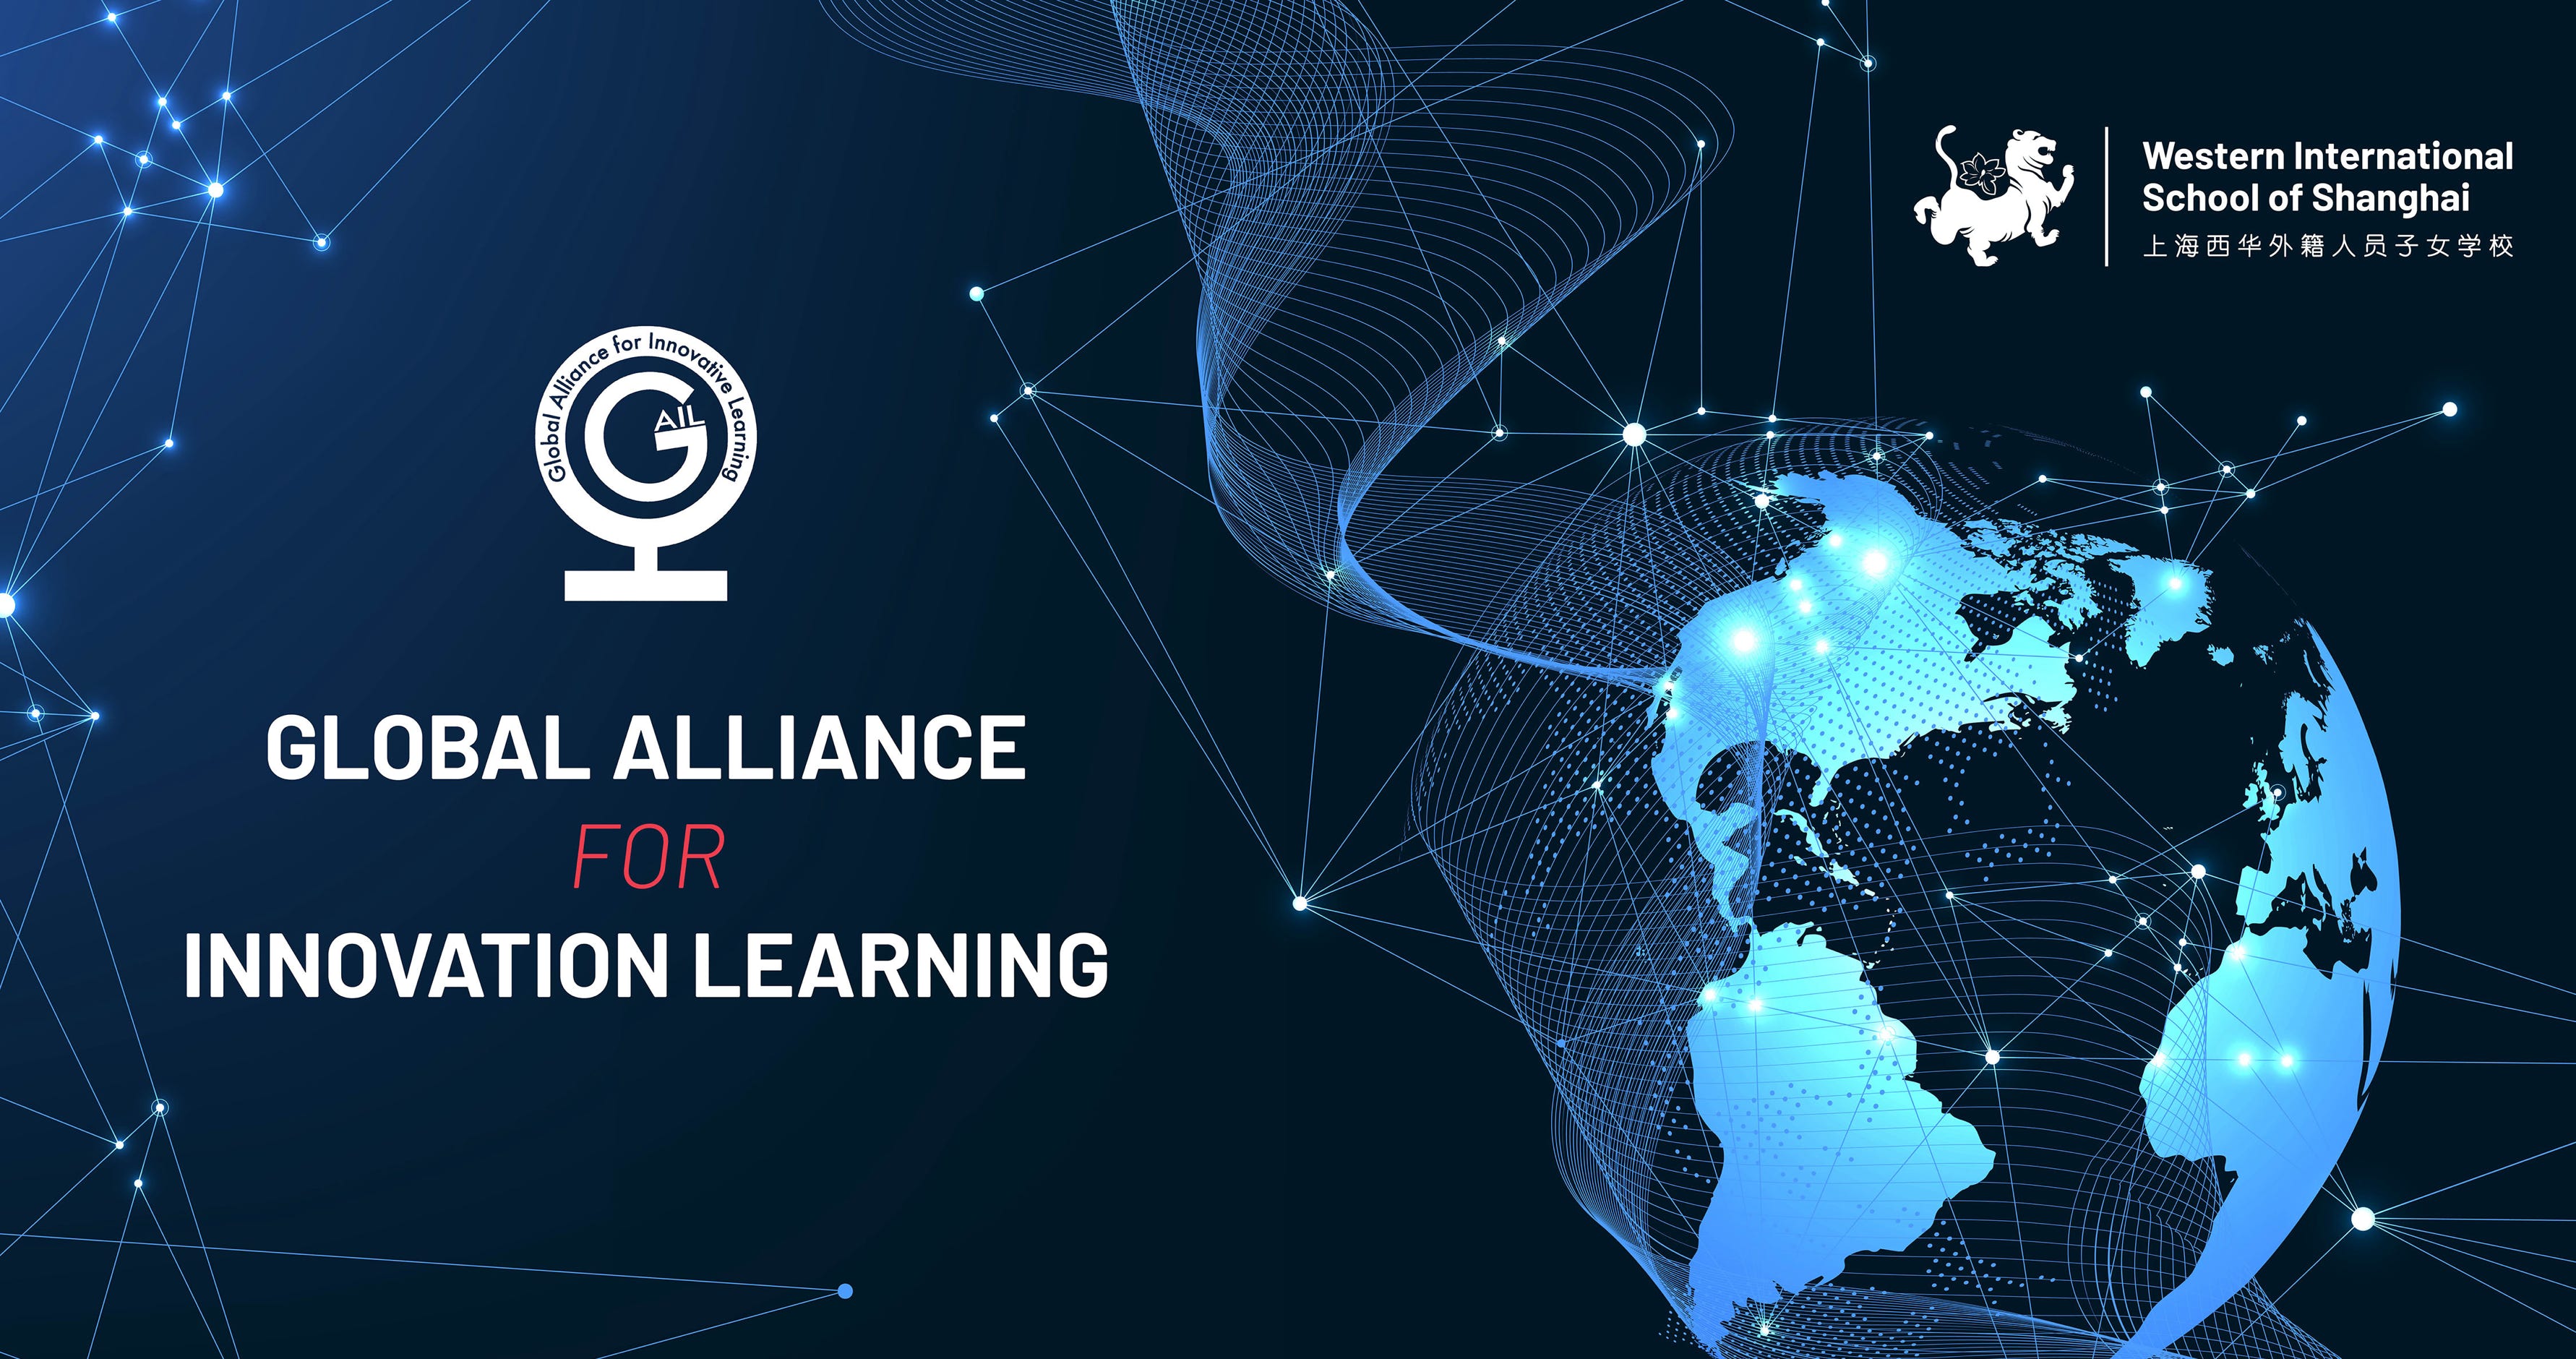 The Global Alliance for Innovative Learning (GAIL) is an internationally renowned organization promoting collaboration and innovation in education. Comprised of eight prominent schools spread across different parts of the world, GAIL unites educational institutions that share common principles and values. These independent, co-educational schools, including the Western International School of Shanghai, Kimbal Union Academy (United States of America), Newton College (Peru), Robert Gordon's College (United Kingdom), Kristen School (New Zealand), Prestige College (South Africa), Scotch College (Australia), and Woodstock School (India), prioritize forward-thinking approaches to education.